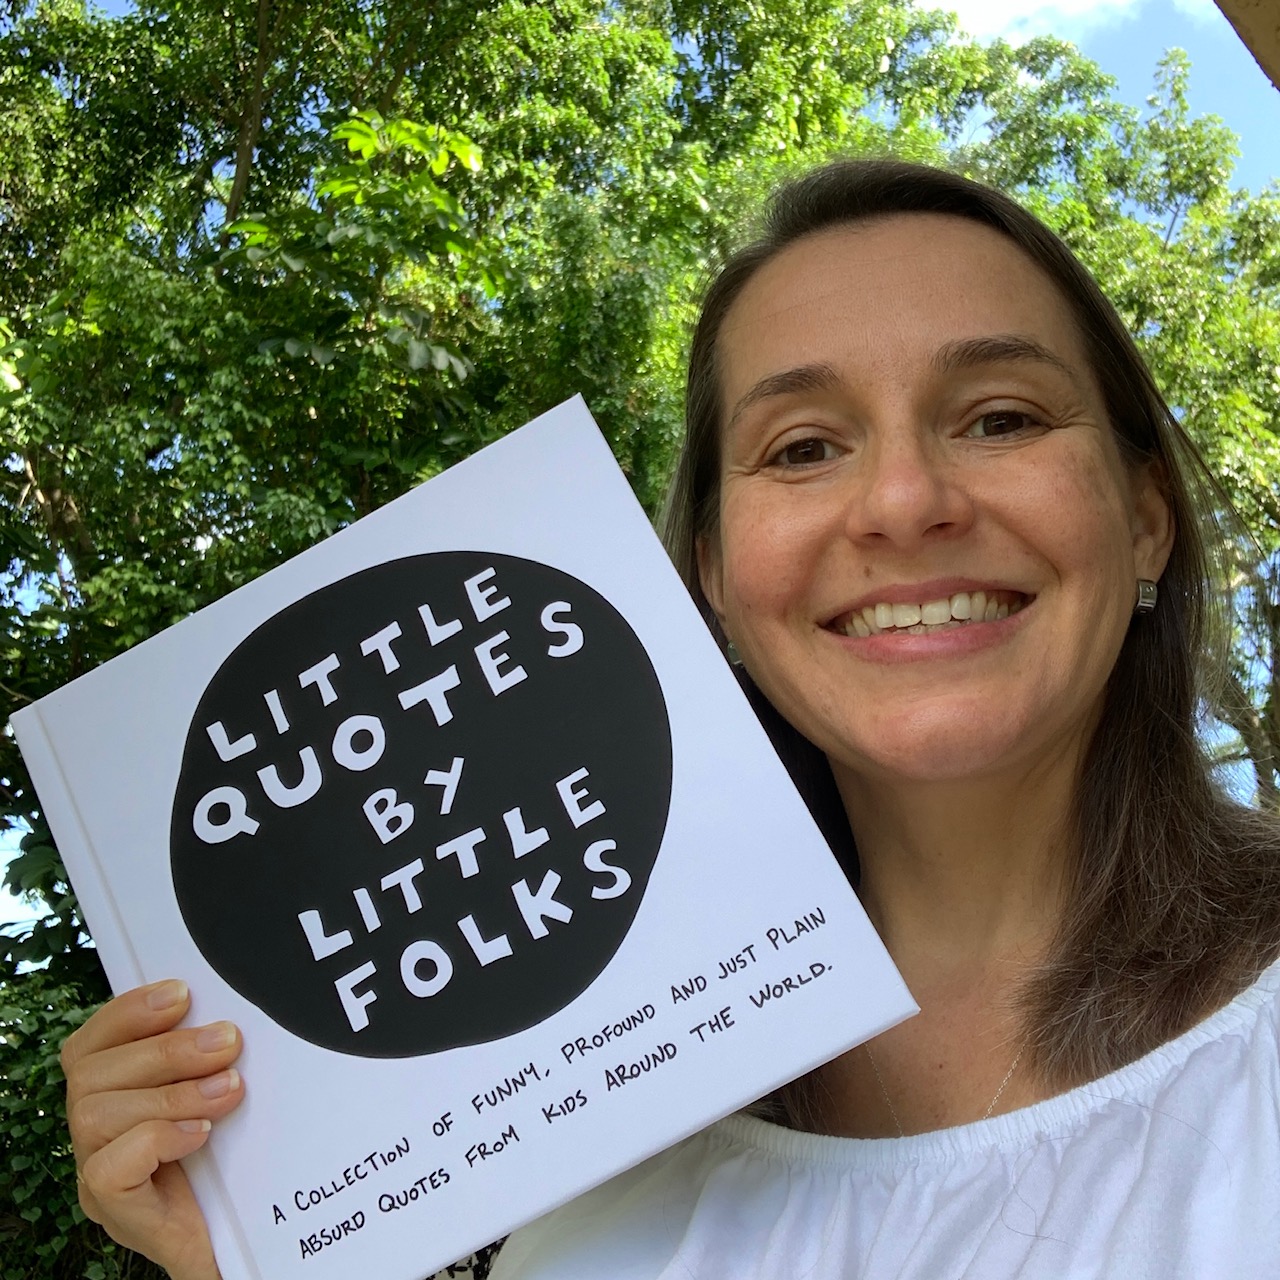 Rebecca Carter holds a copy of her book, Little Quotes by Little Folks.